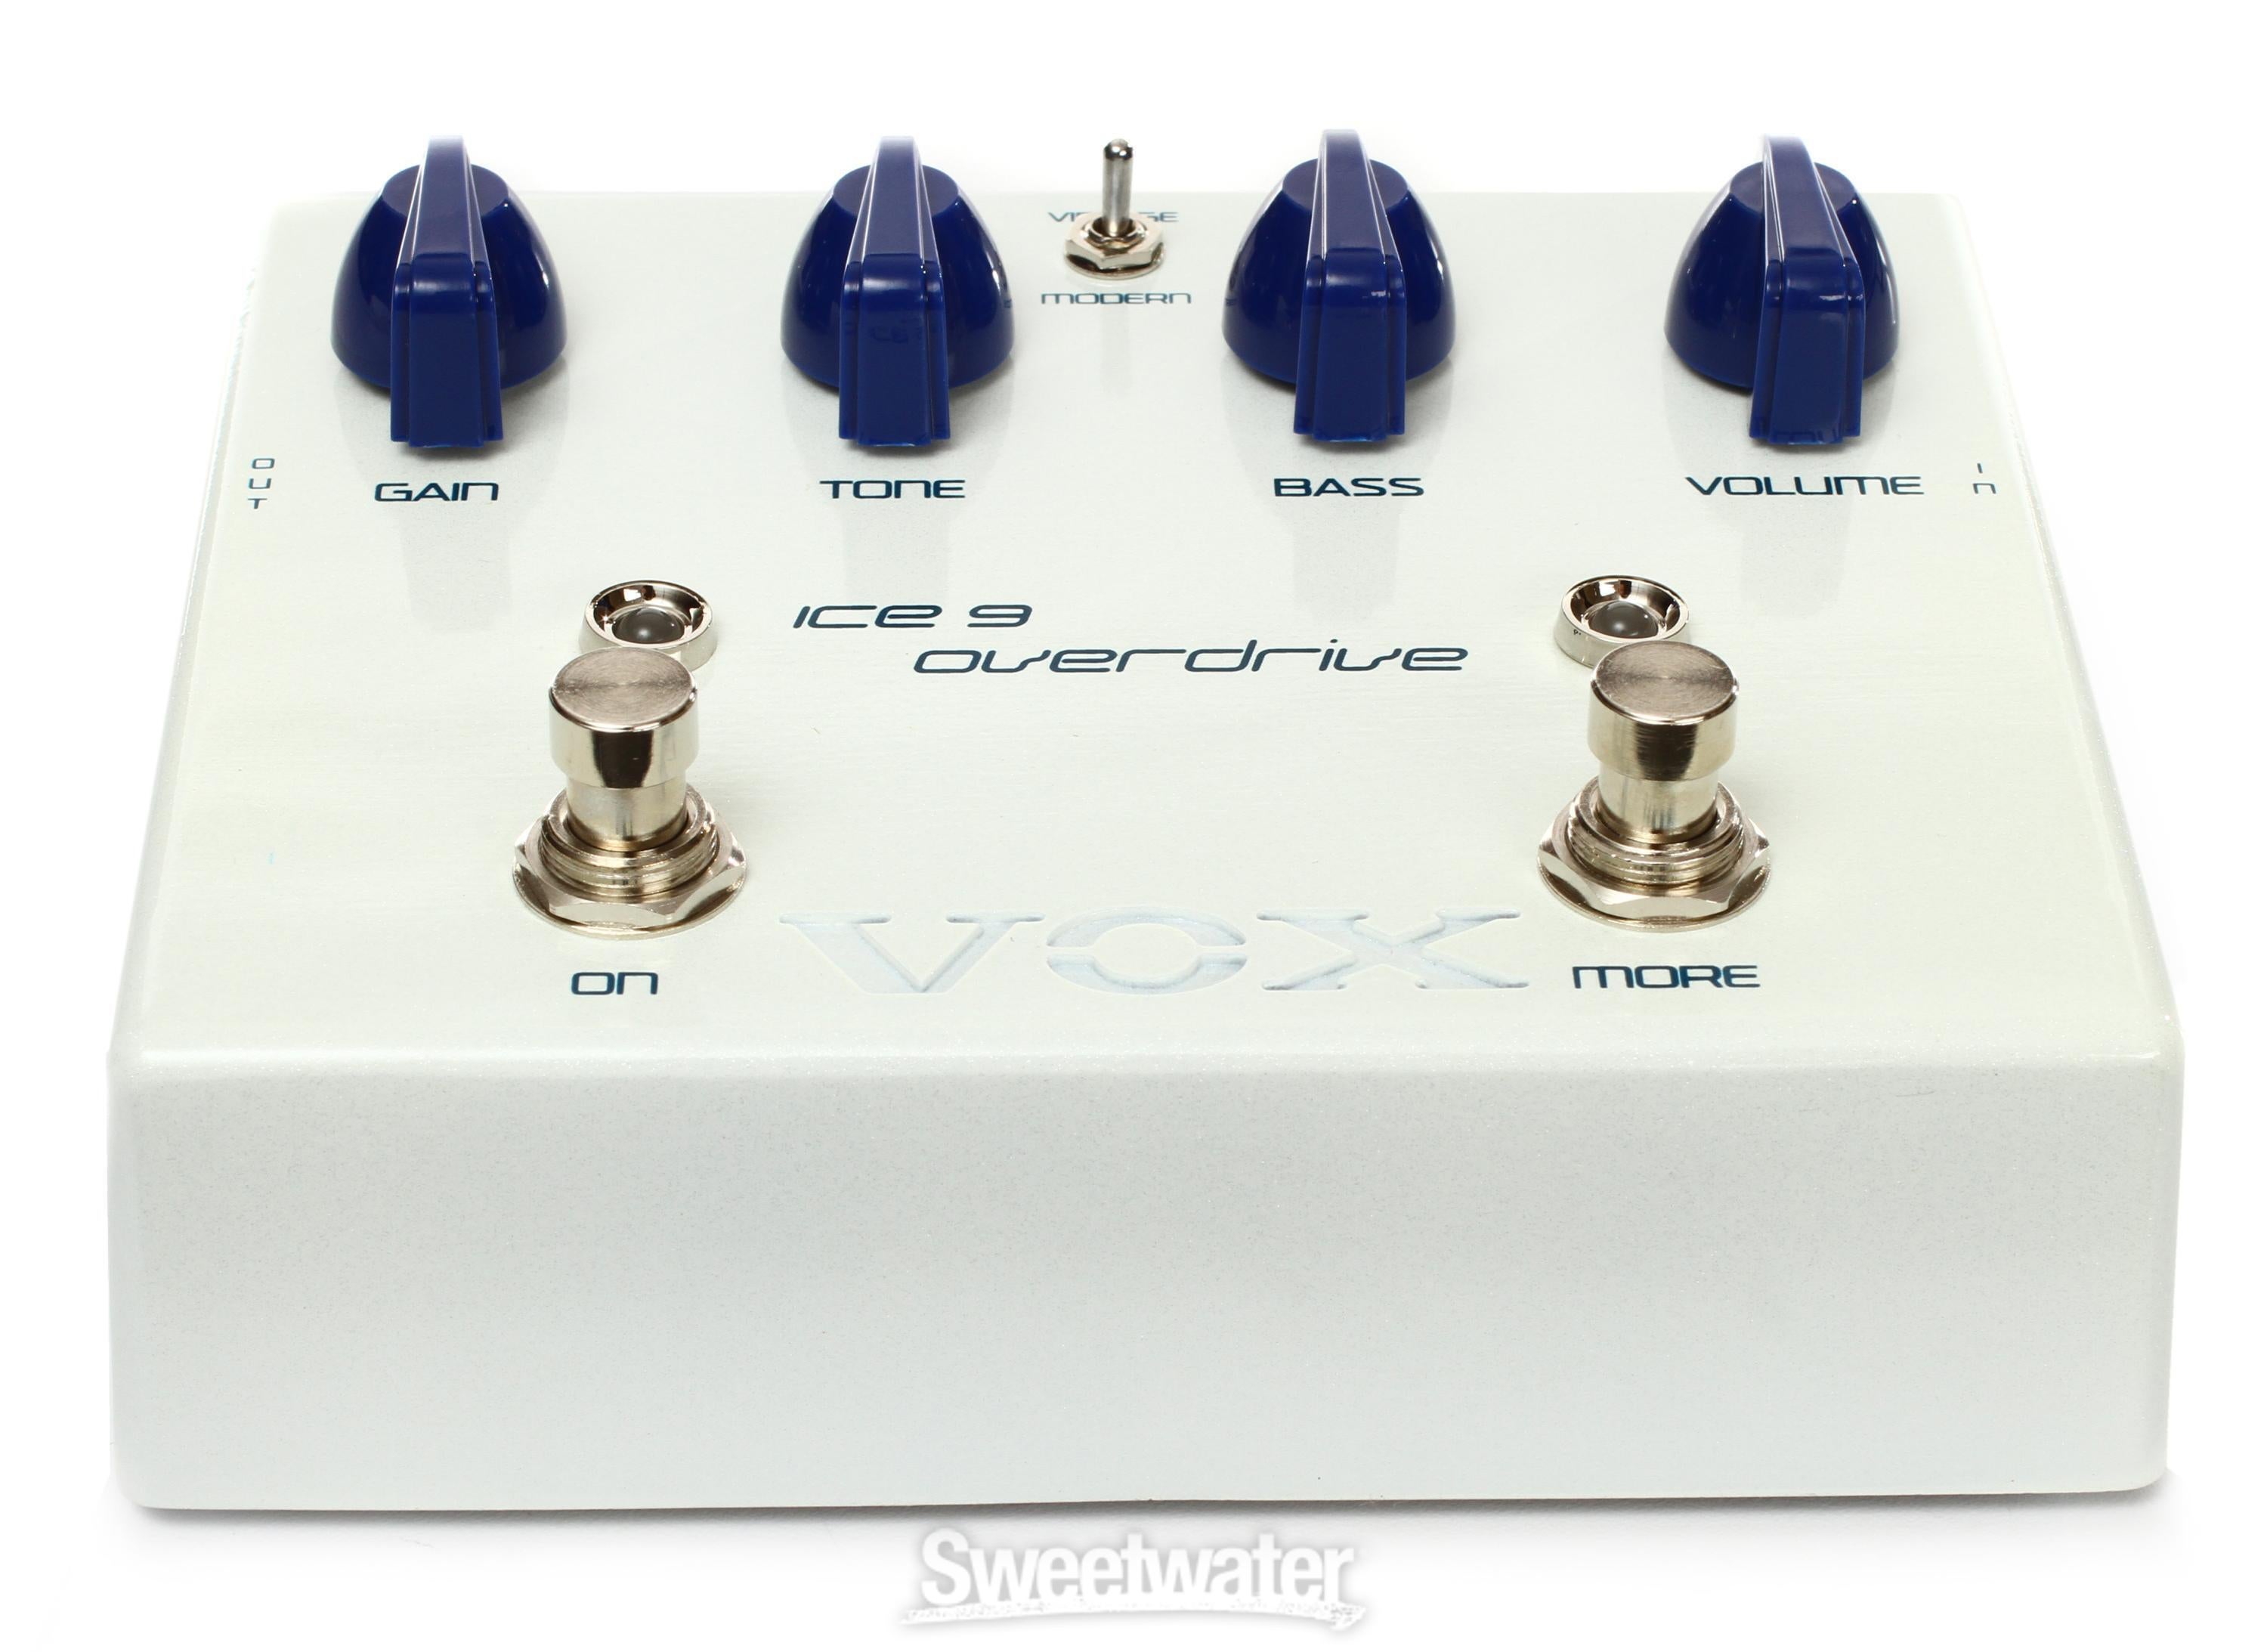 Vox Ice 9 Satriani Overdrive Pedal Reviews | Sweetwater